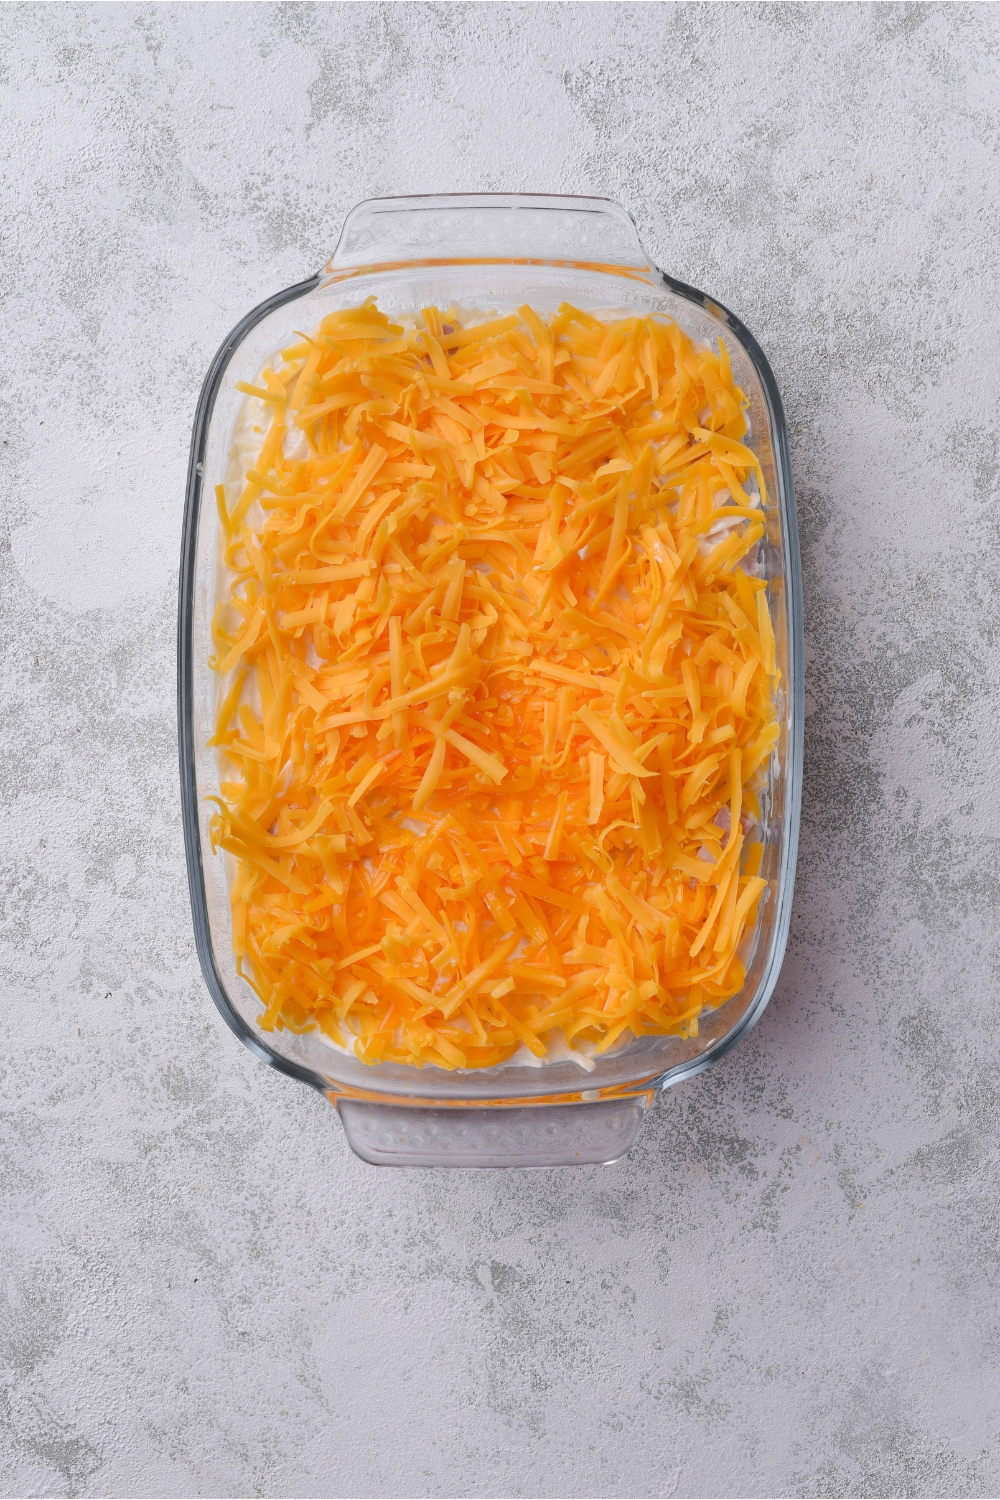 A casserole covered in shredded cheese.